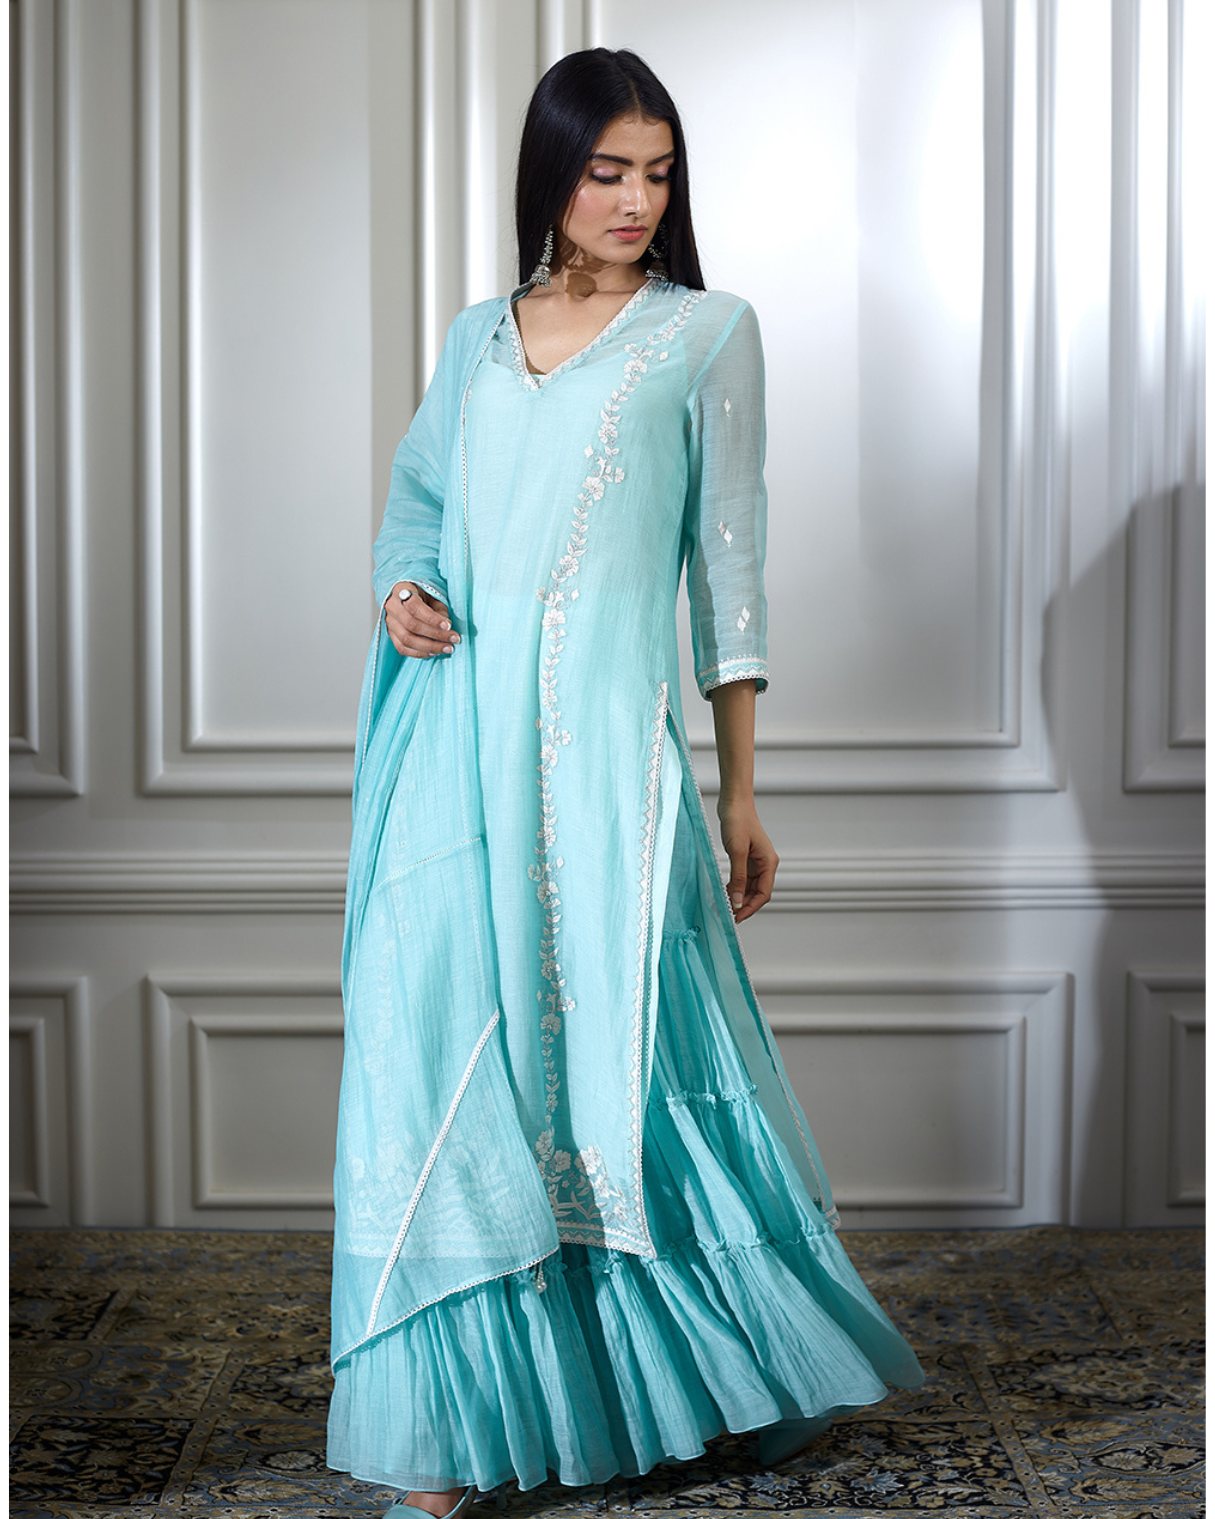 Aqua embroidered kurta with tiered sharara and lace detailing